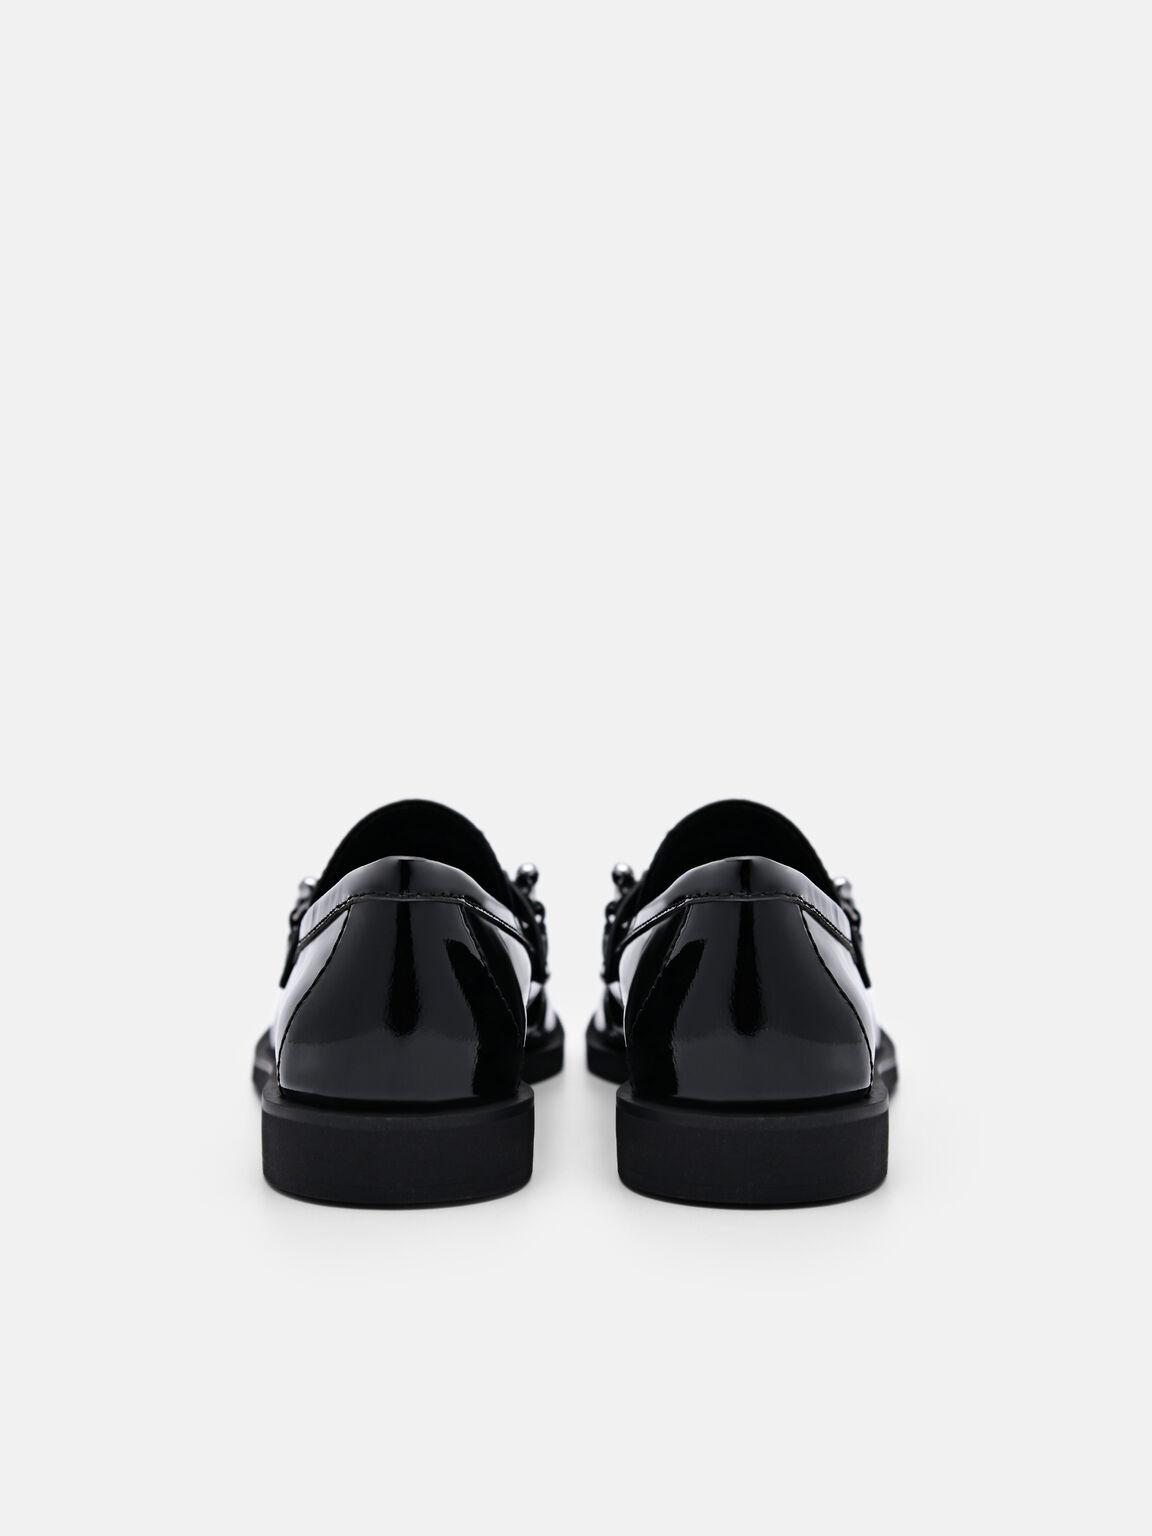 Cami Leather Loafers, Black, hi-res